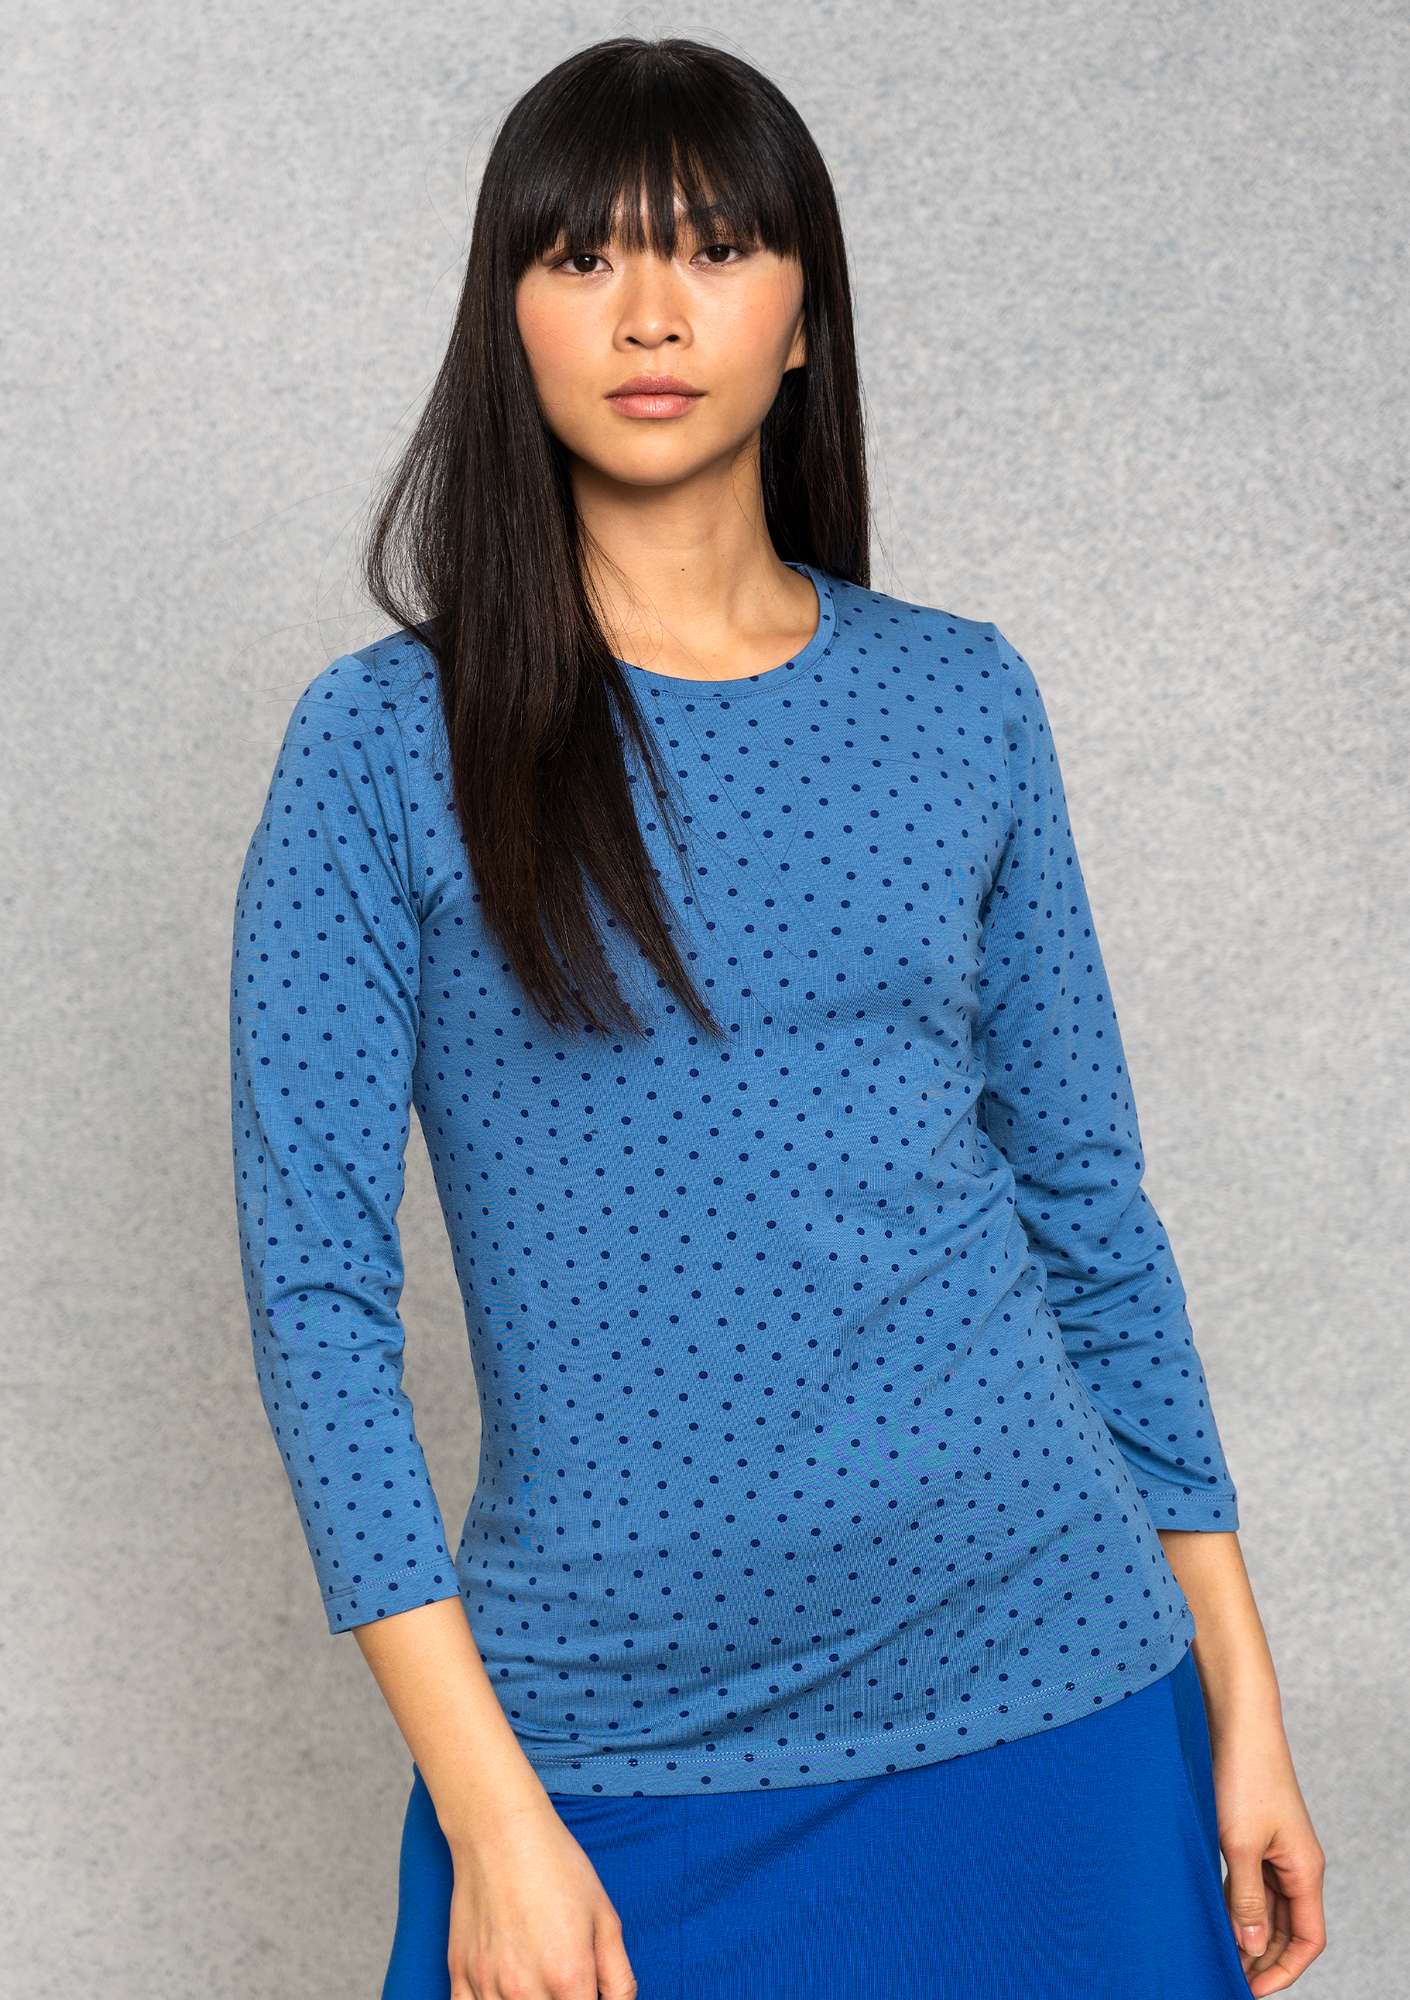 Pytte top flax blue/patterned